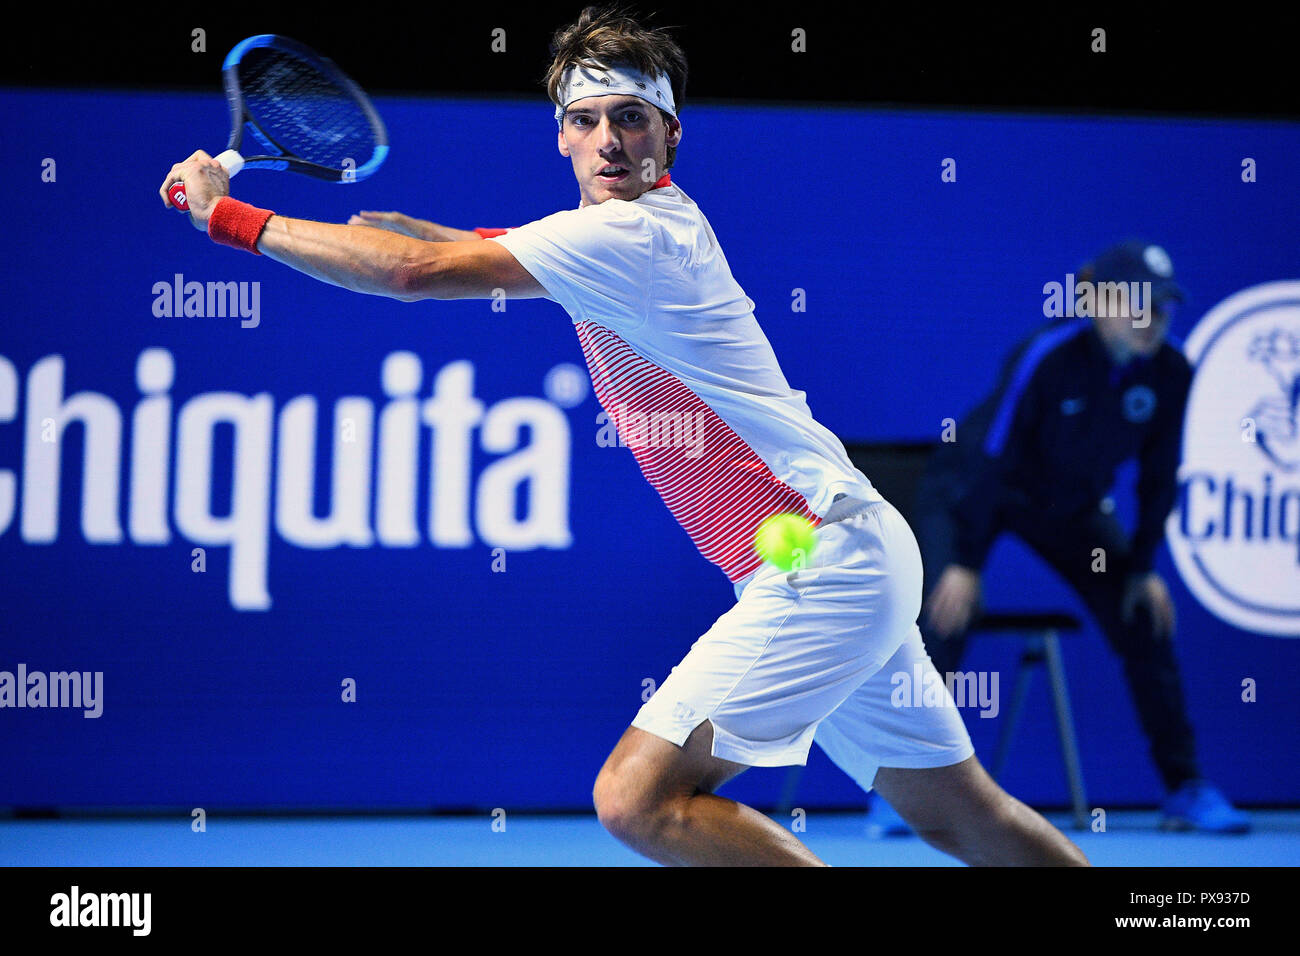 Marc-Andrea Huesler in action during a mens singles match at the 2022 US Open, Tuesday, Aug